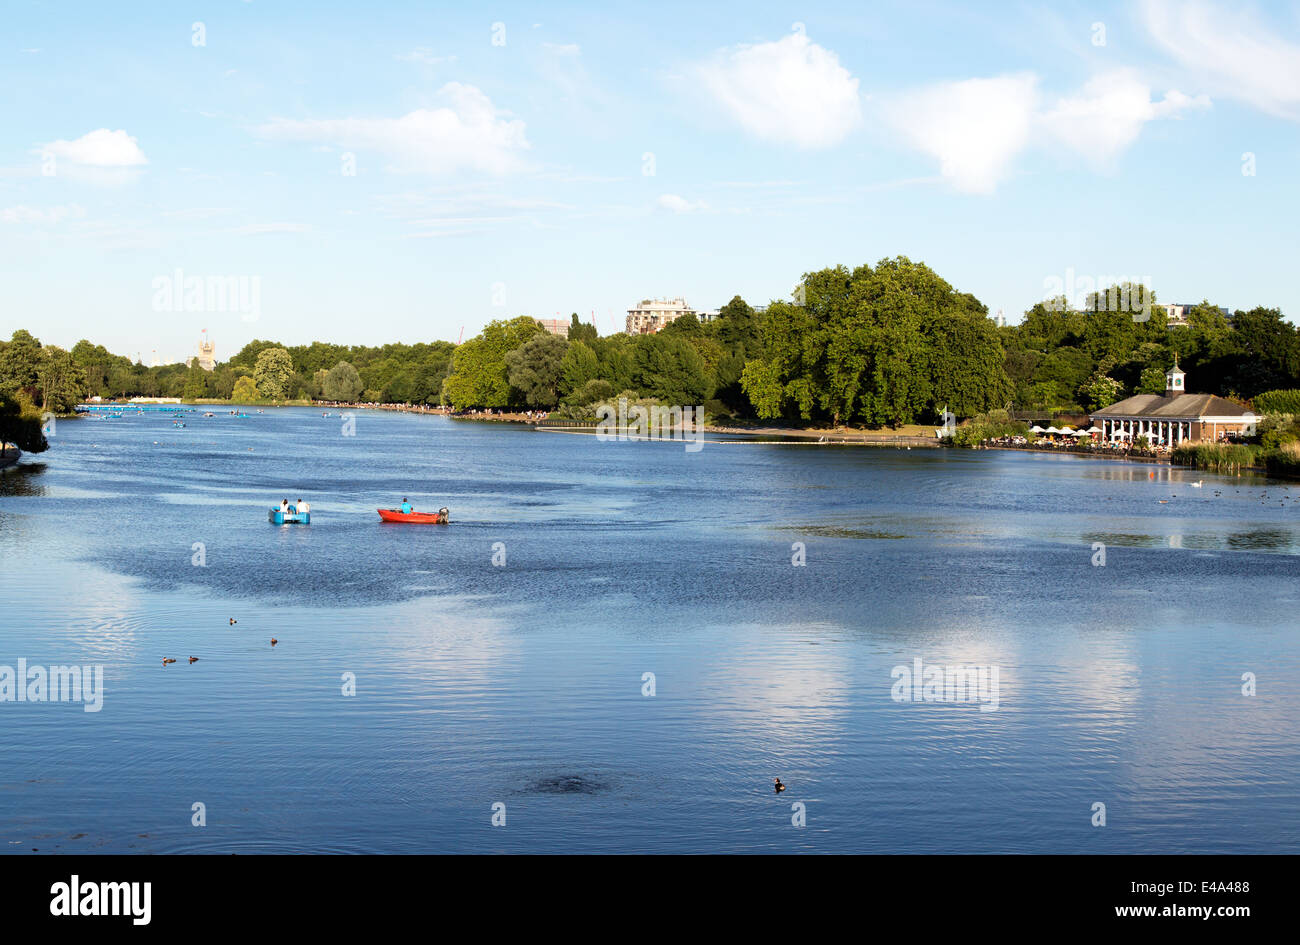 Boating on The Serpentine Hyde Park London UK Stock Photo